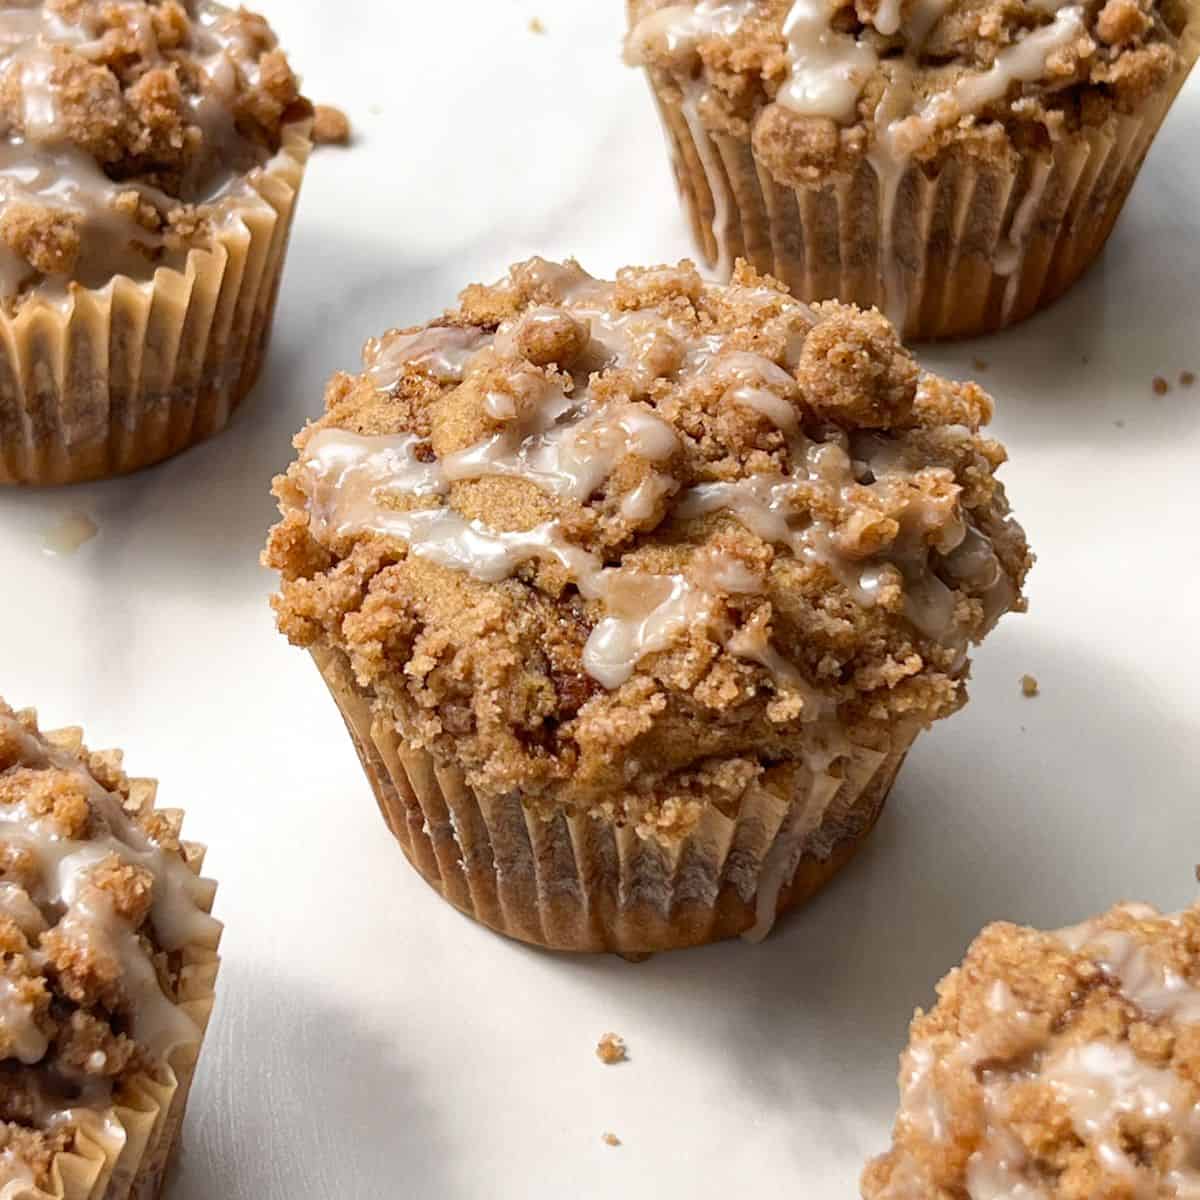 Cinnamon Streusel Muffins topped with Vanilla Glaze